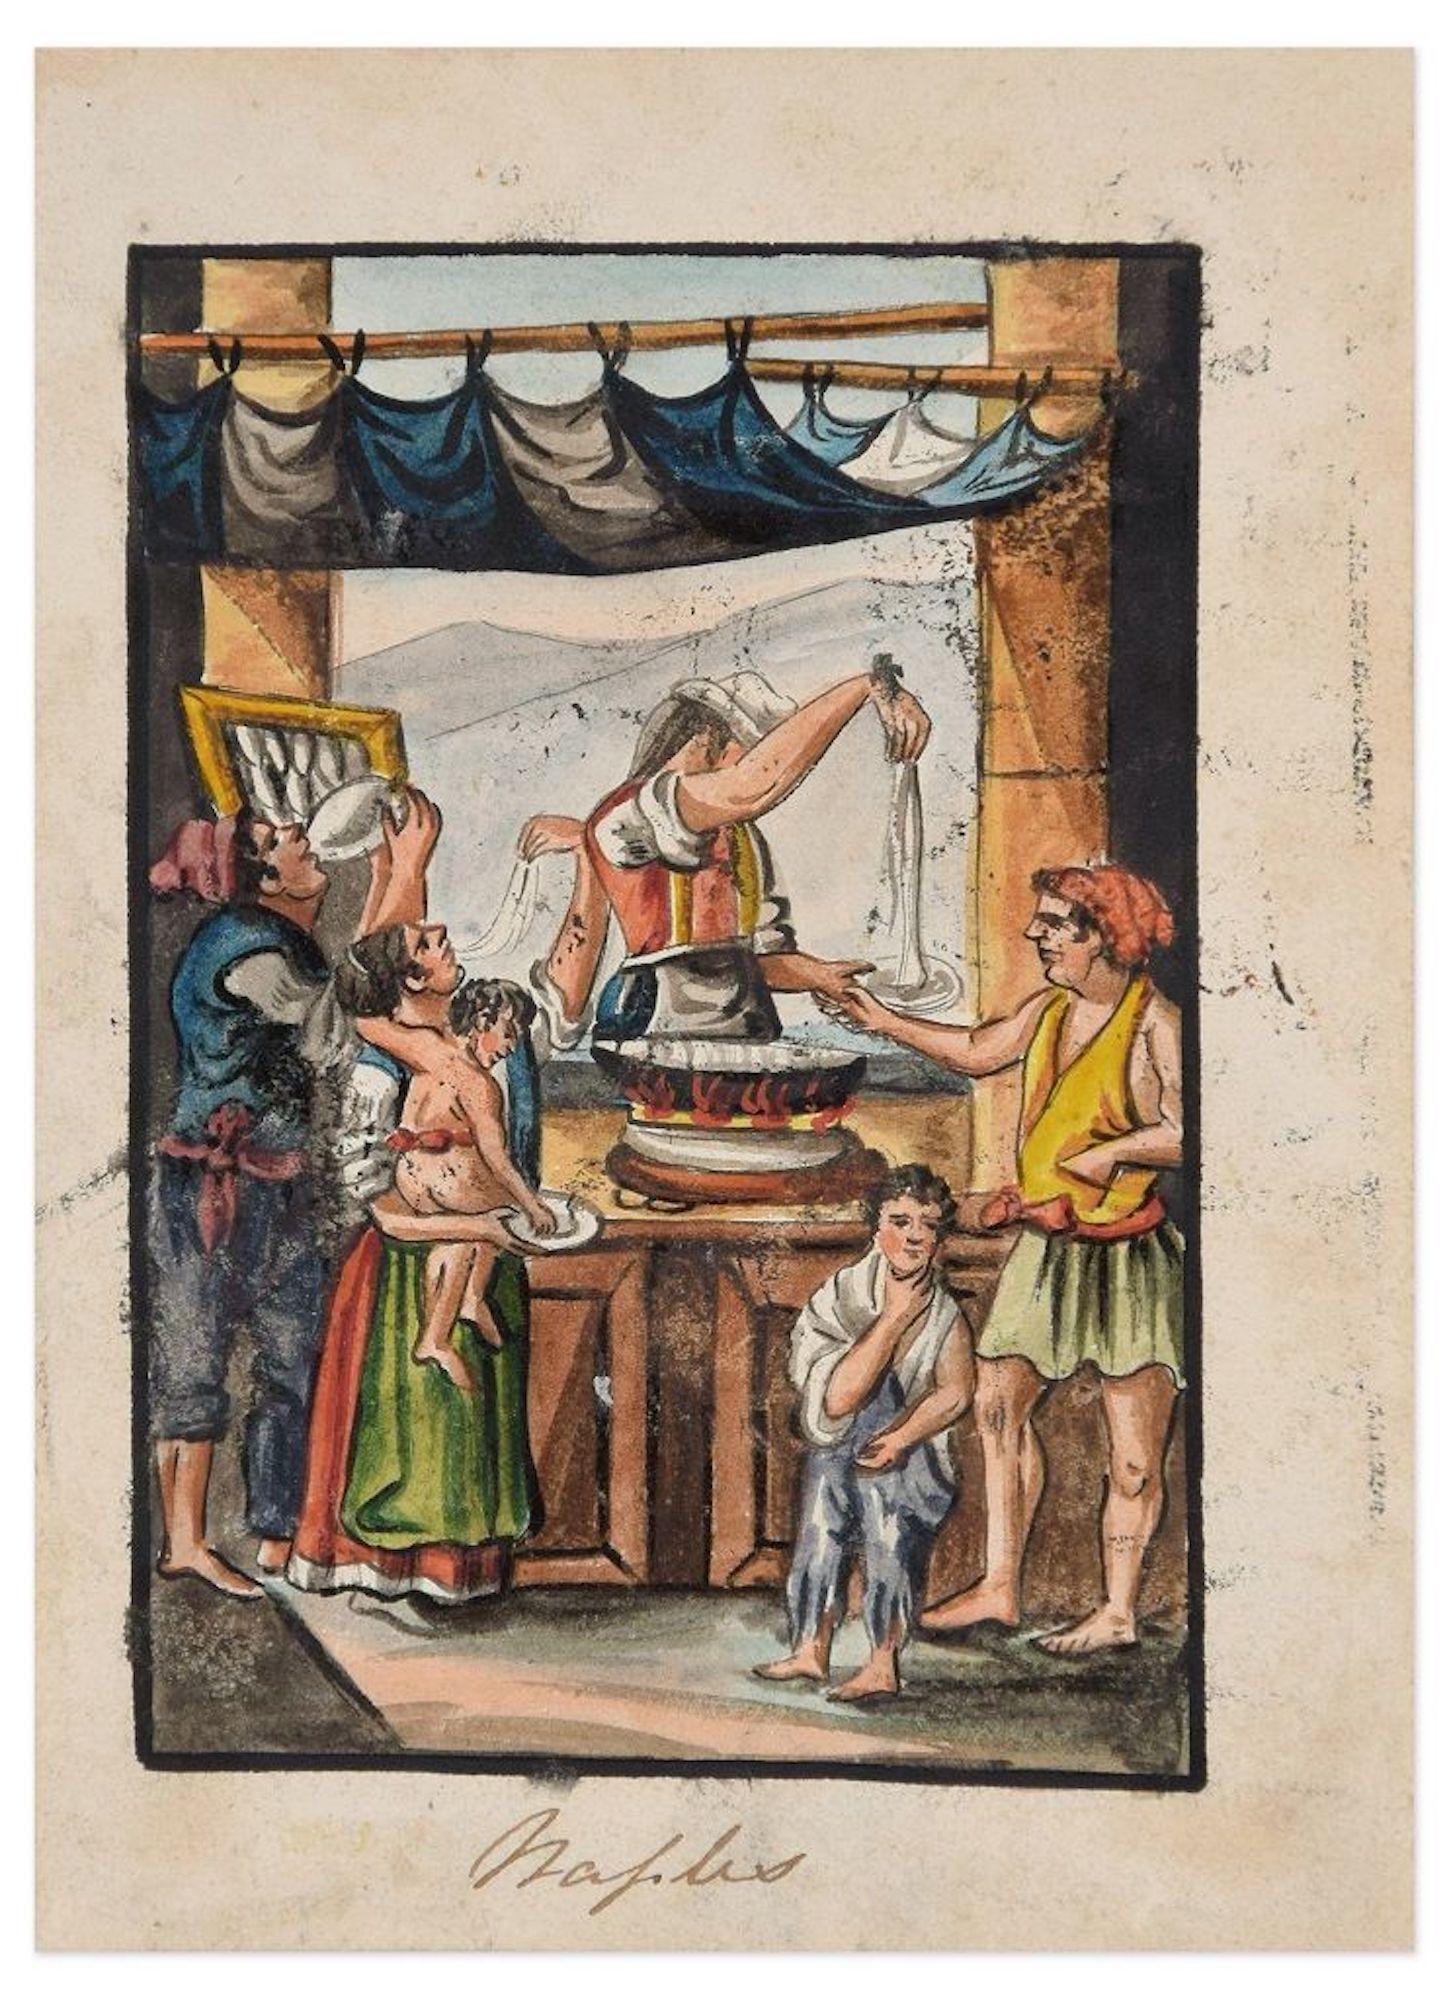 Unknown Figurative Art - Food Seller - Original Ink and Watercolor by Anonymous Neapolitan Master - 1800